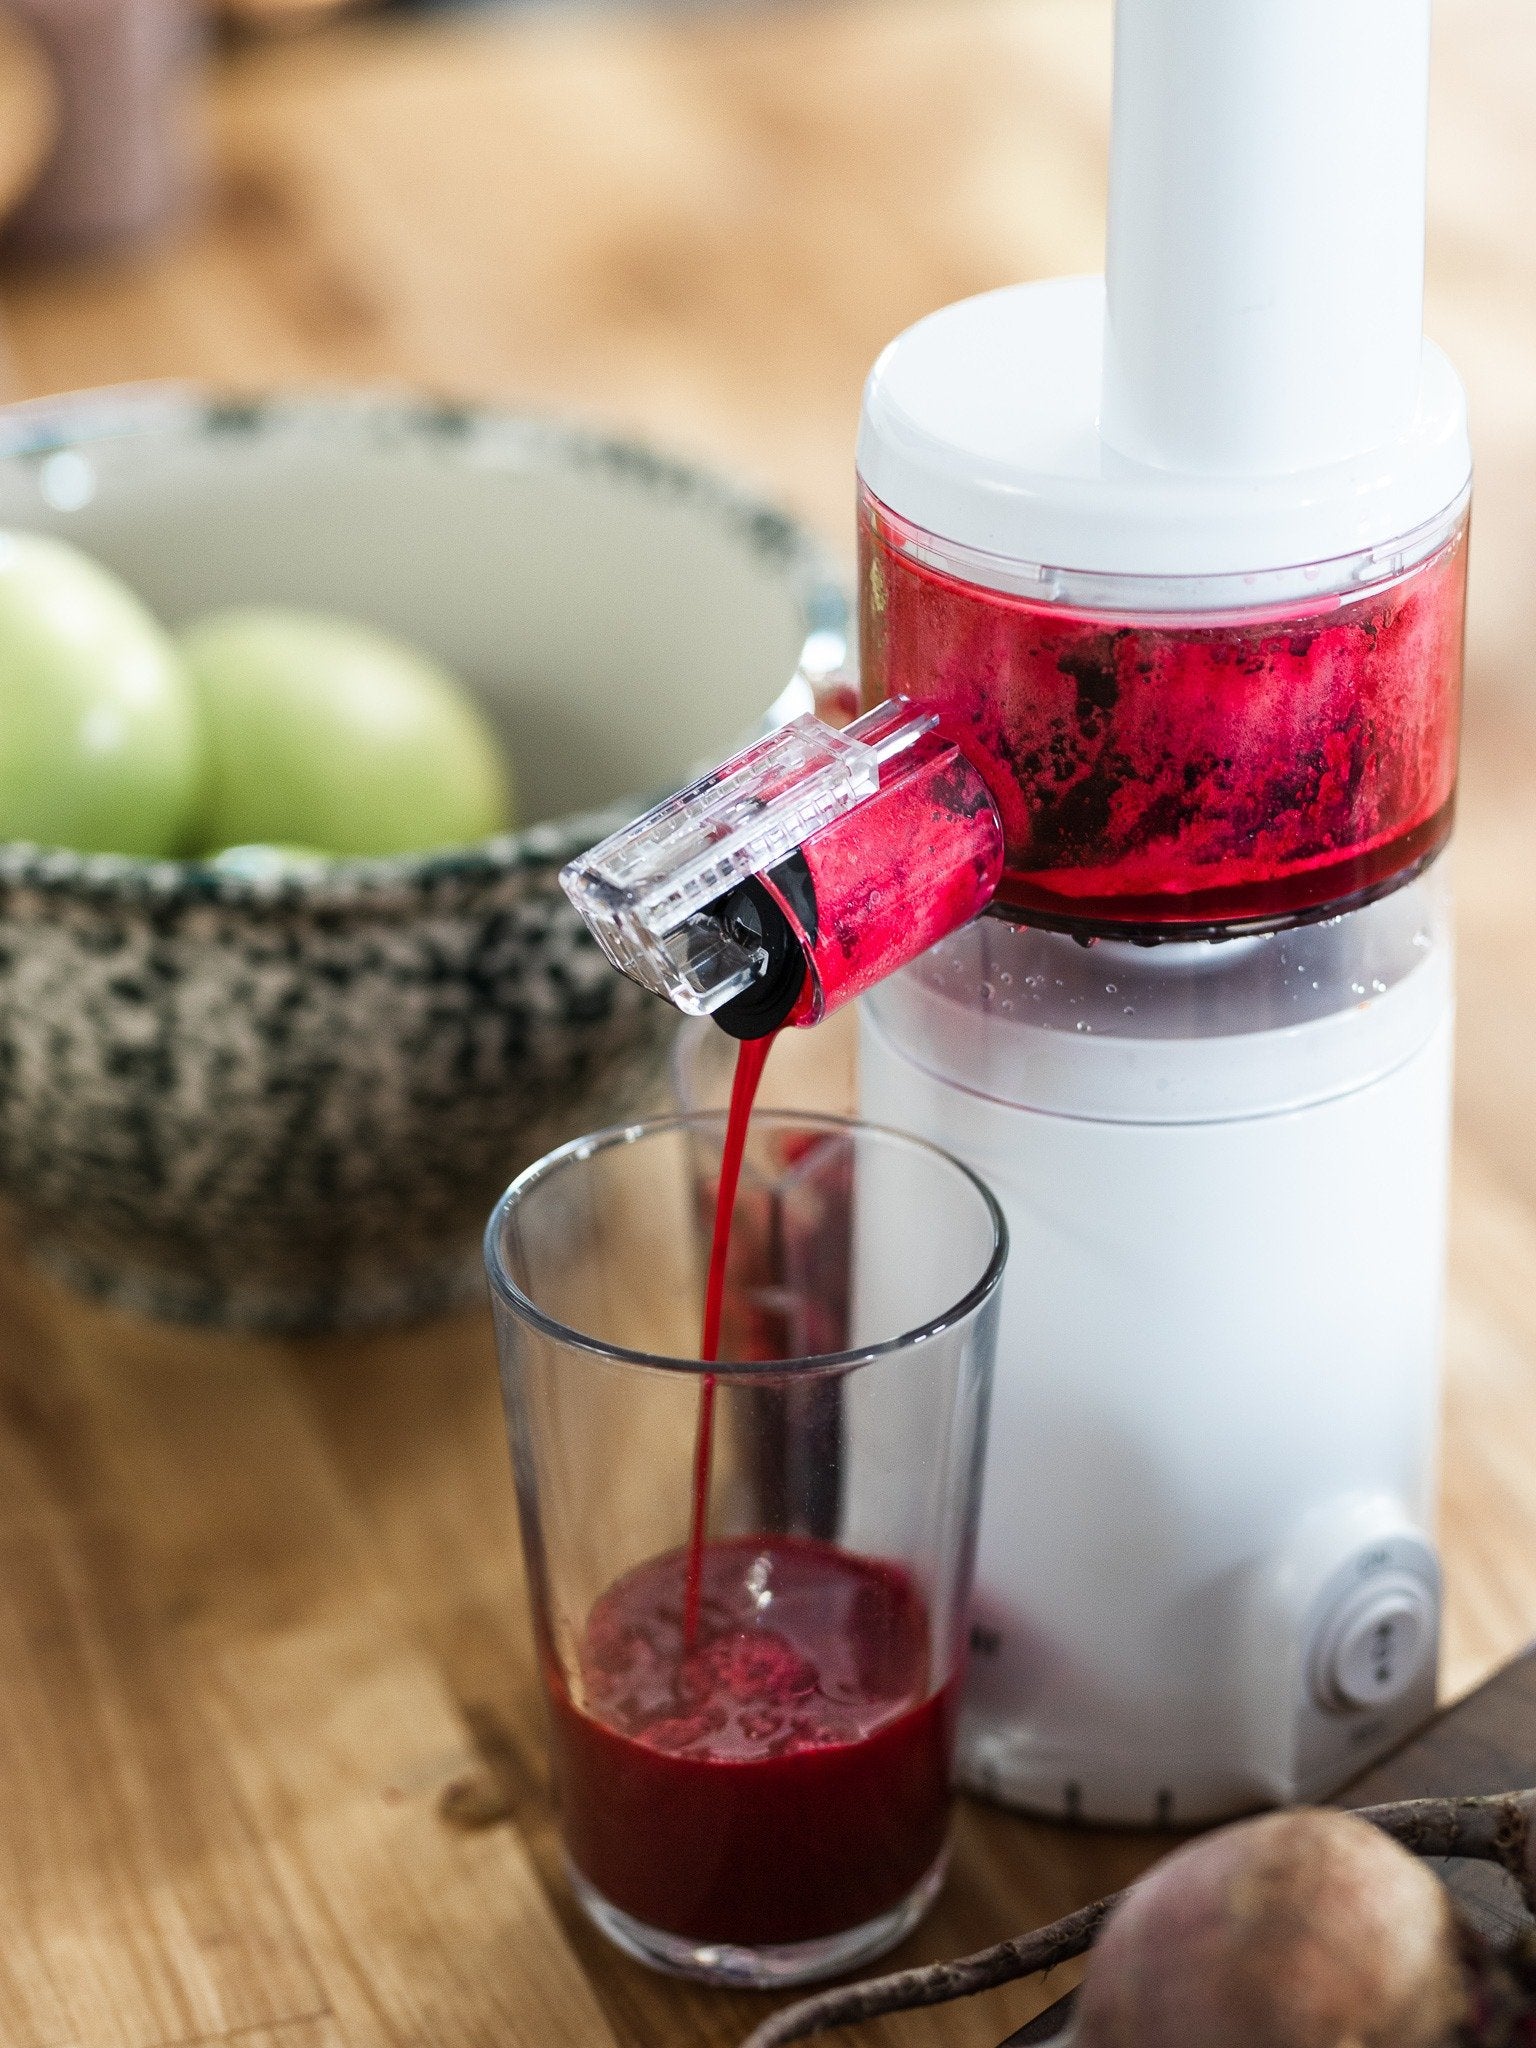 Portable Cordless Electric Juicer. There is no need to remove the